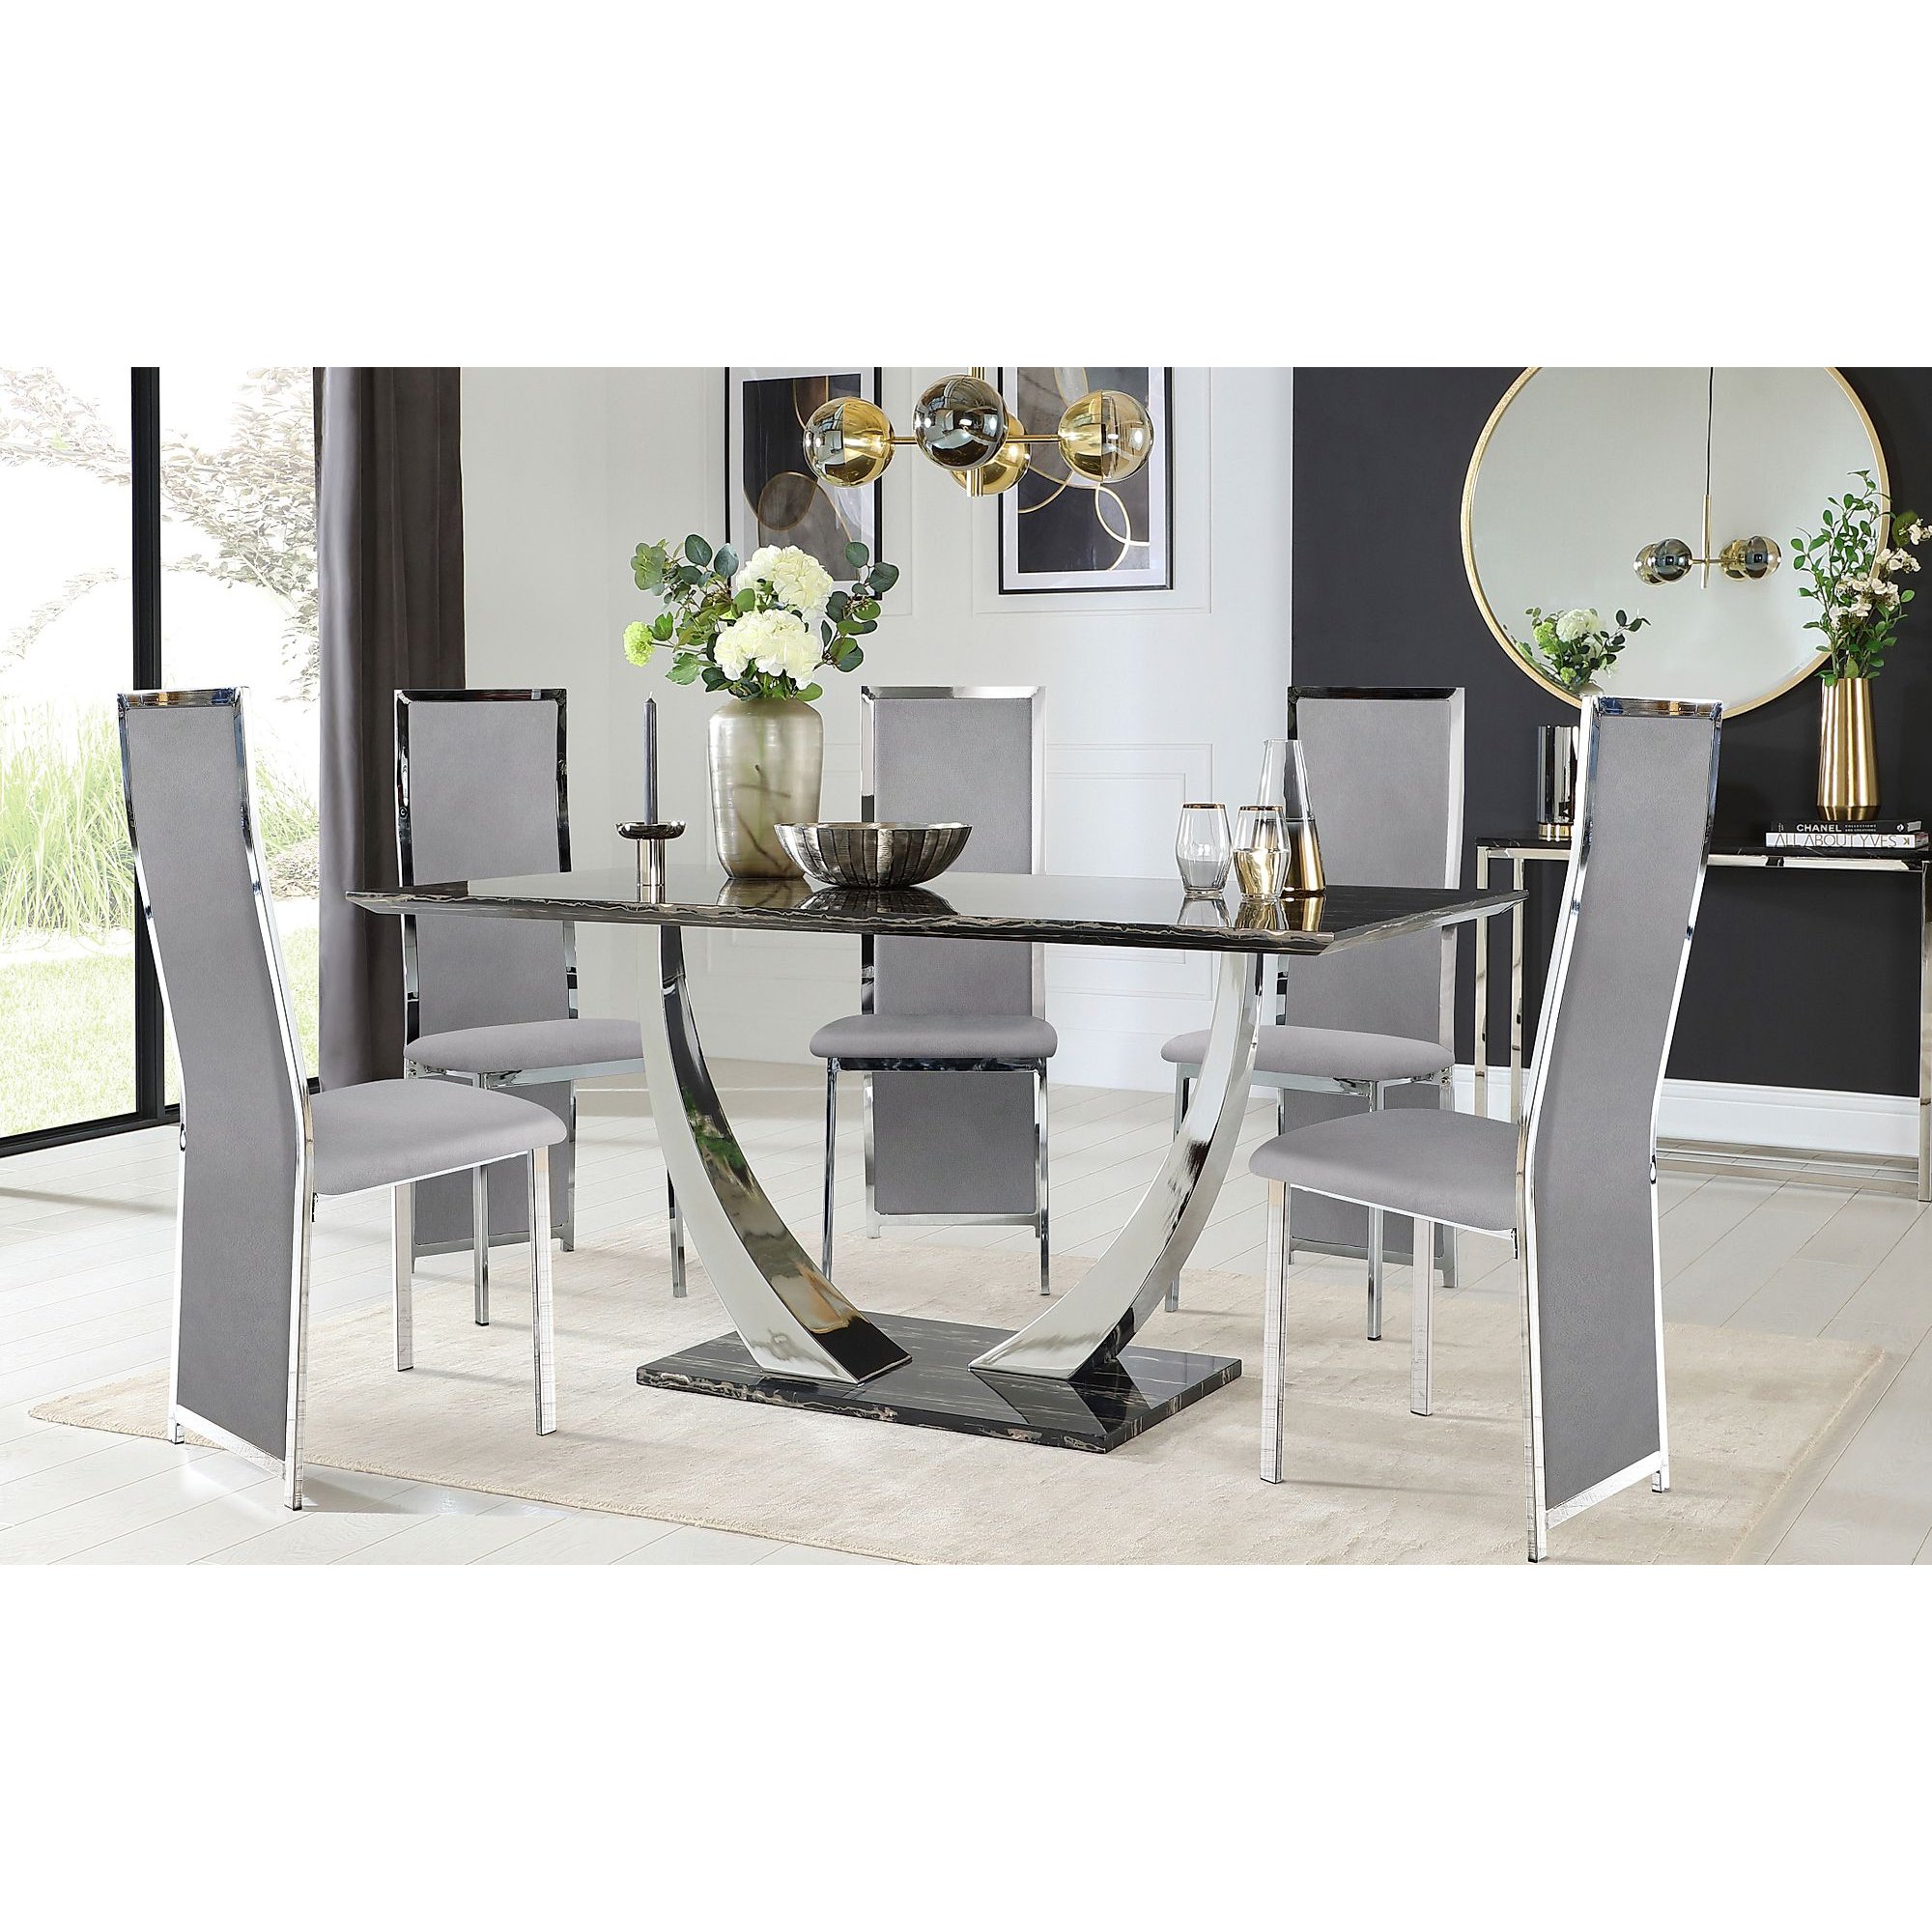 Peake Black Marble and Chrome Dining Table with 6 Celeste Grey Velvet Chairs